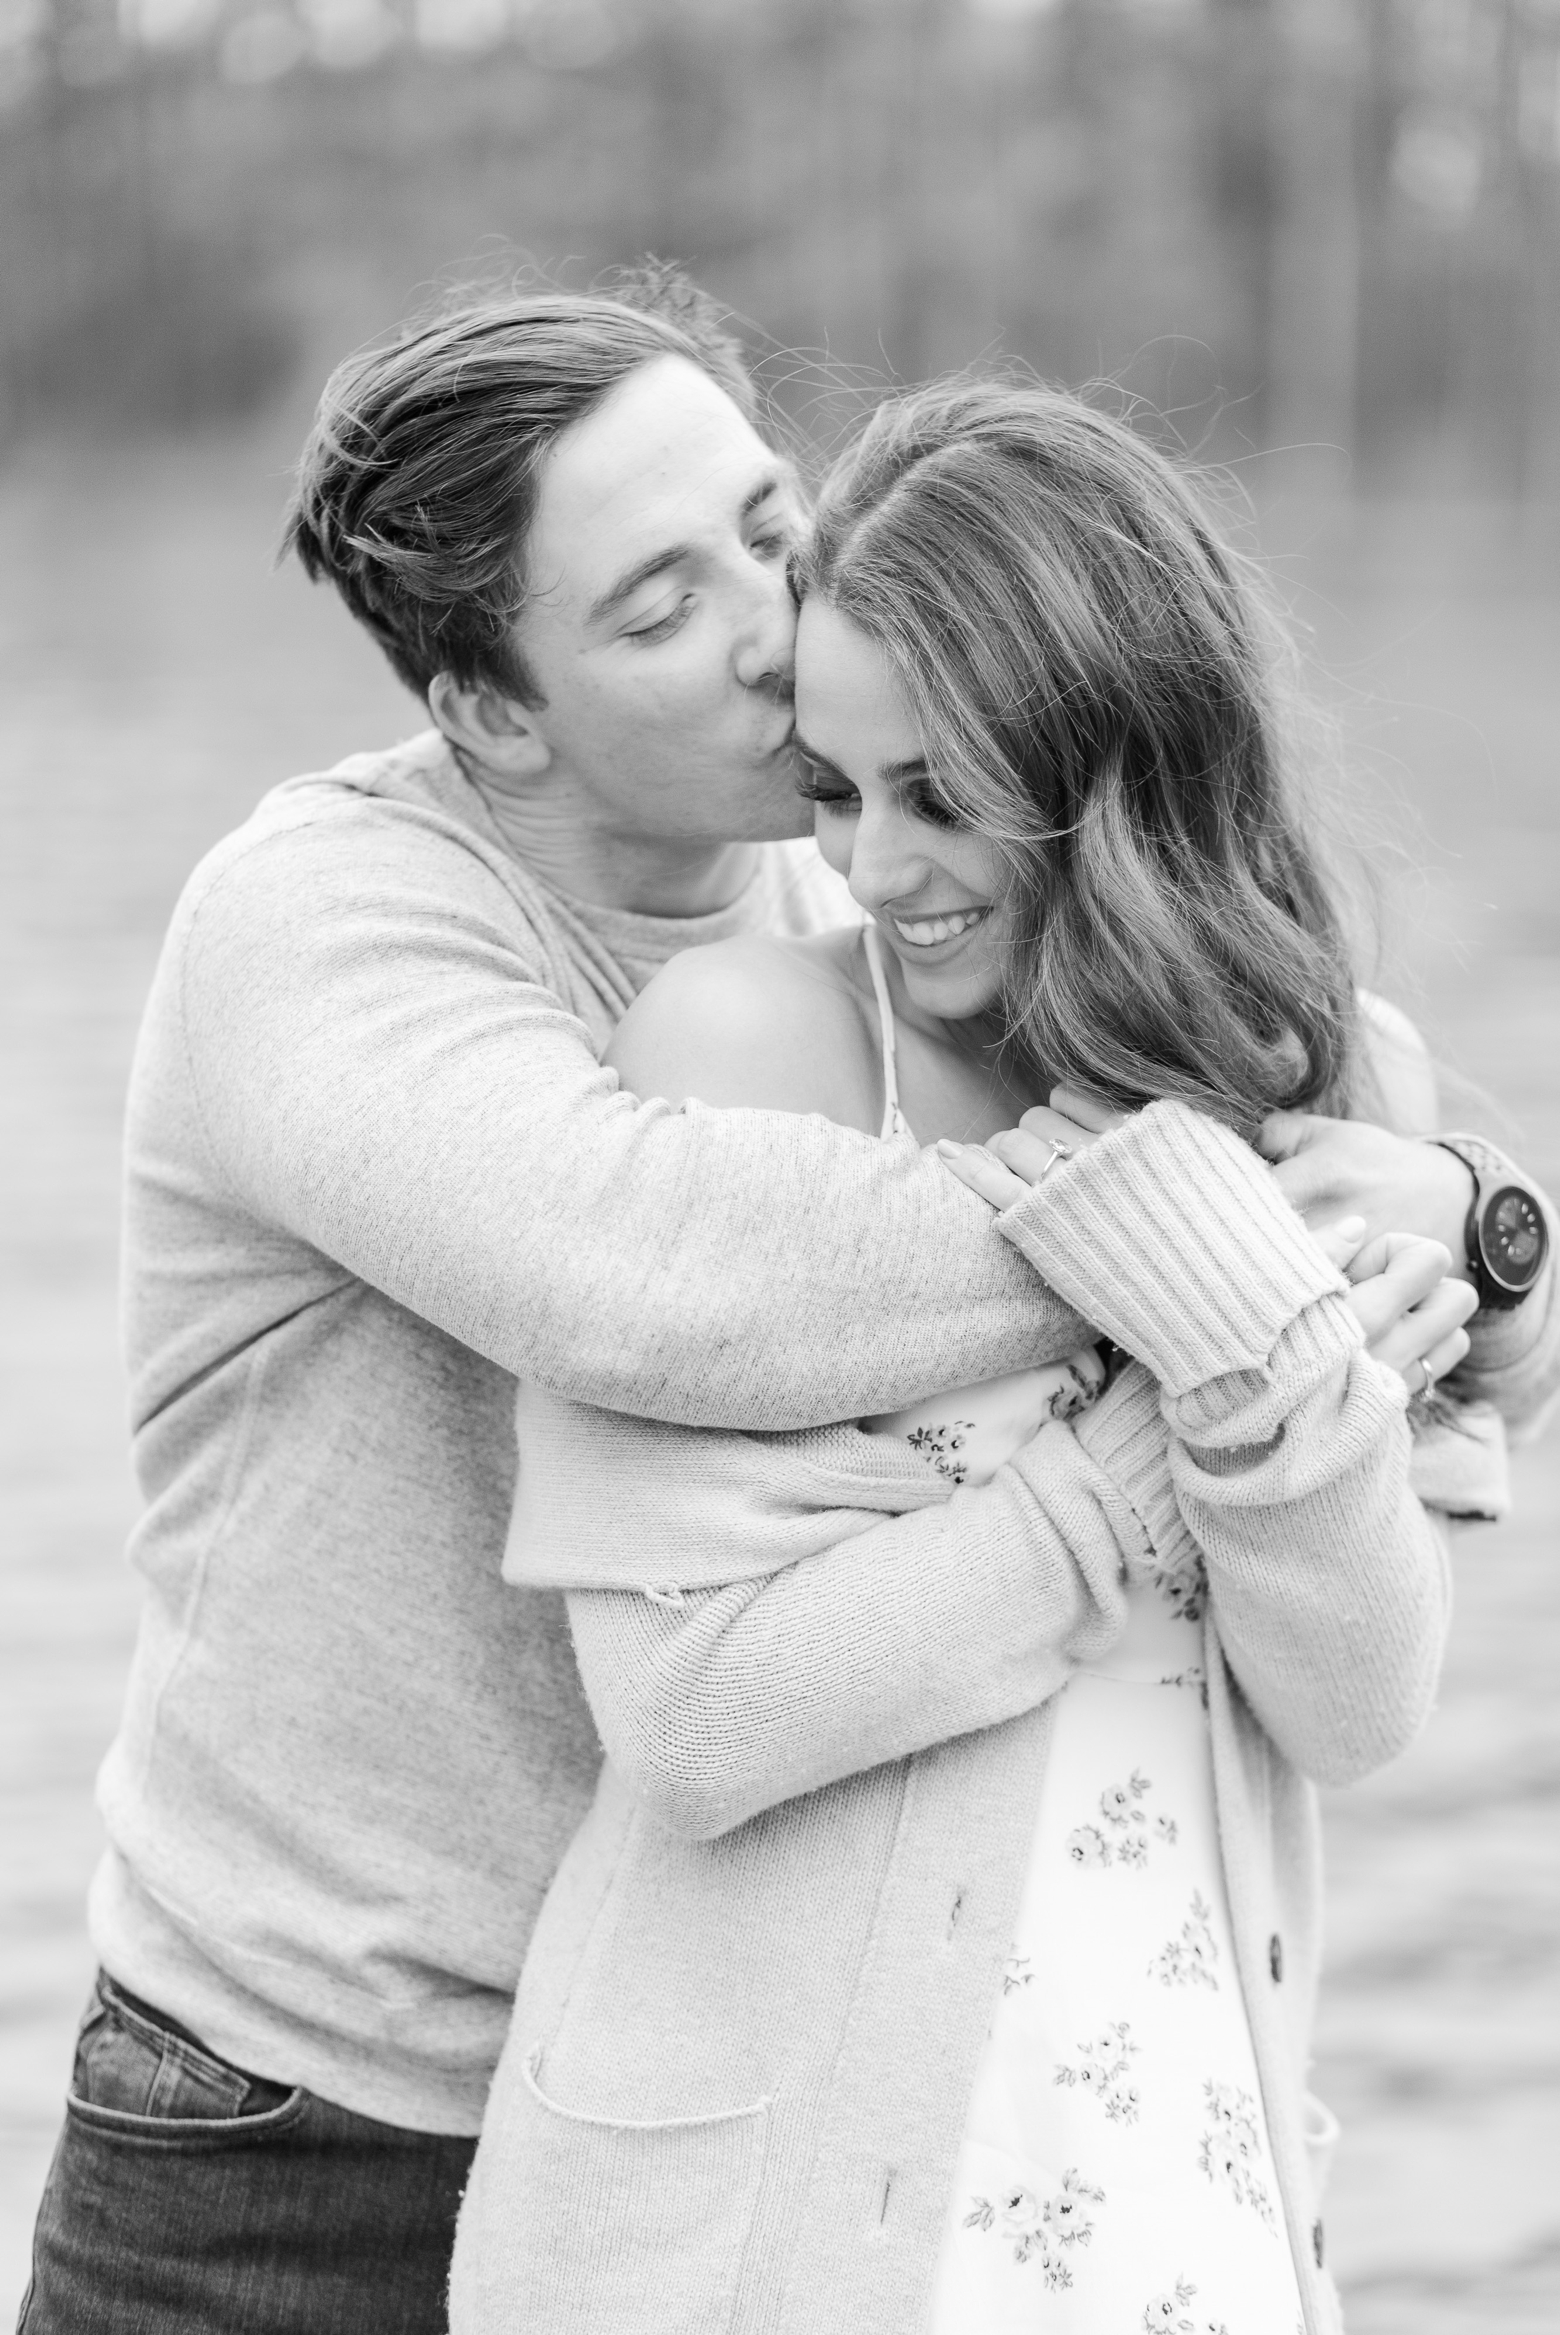 Oak Grove Lake Park Engagement Photography by Angie McPherson Photography